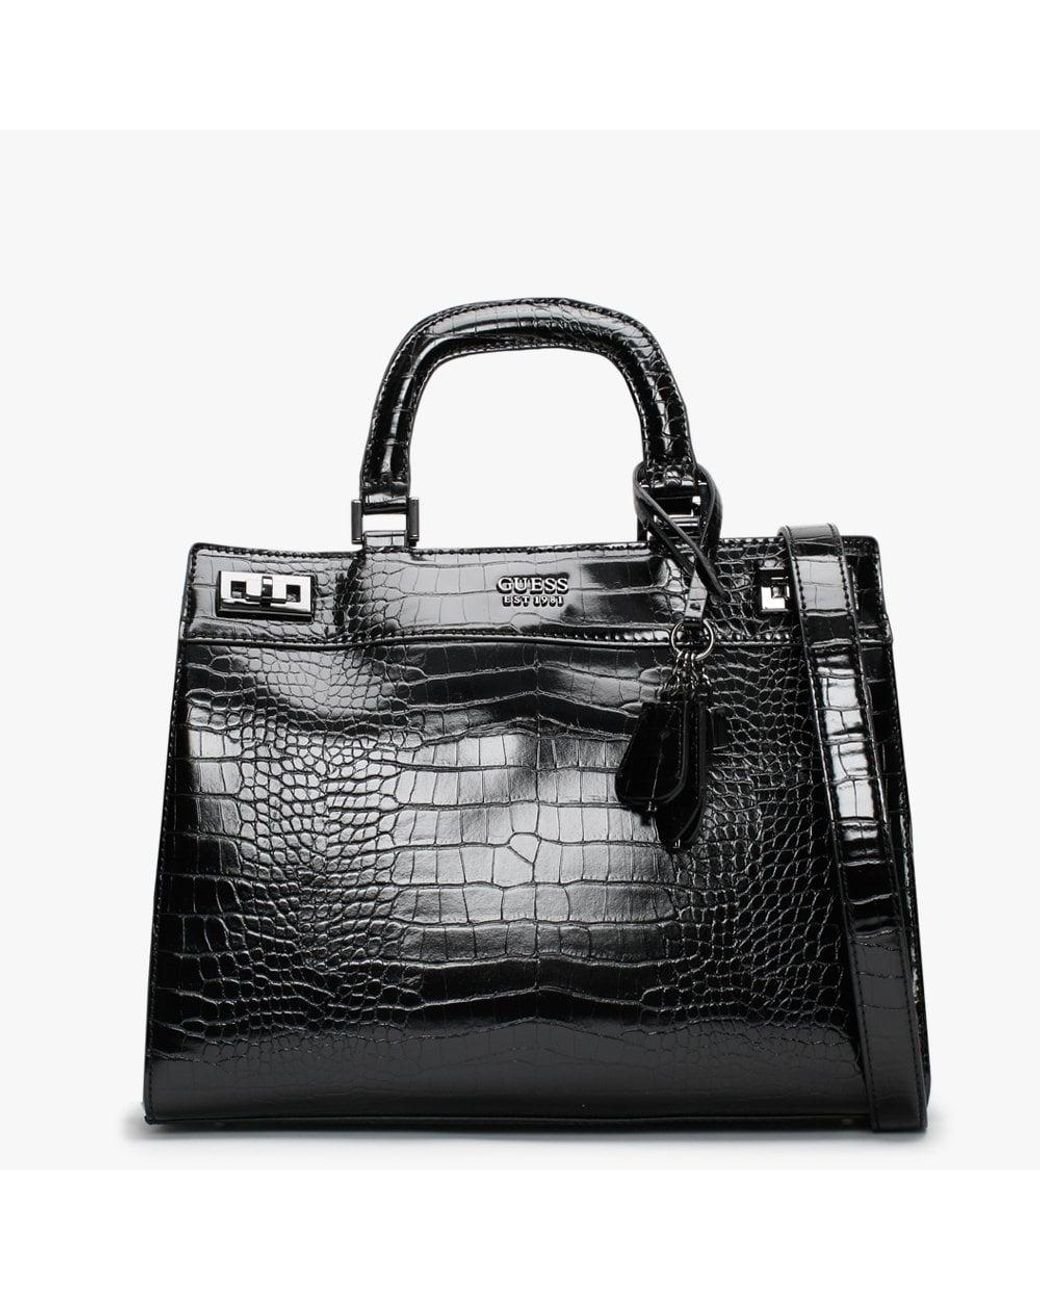  GUESS Womens Katey Croc Luxury Satchel, Black, One Size US :  Clothing, Shoes & Jewelry